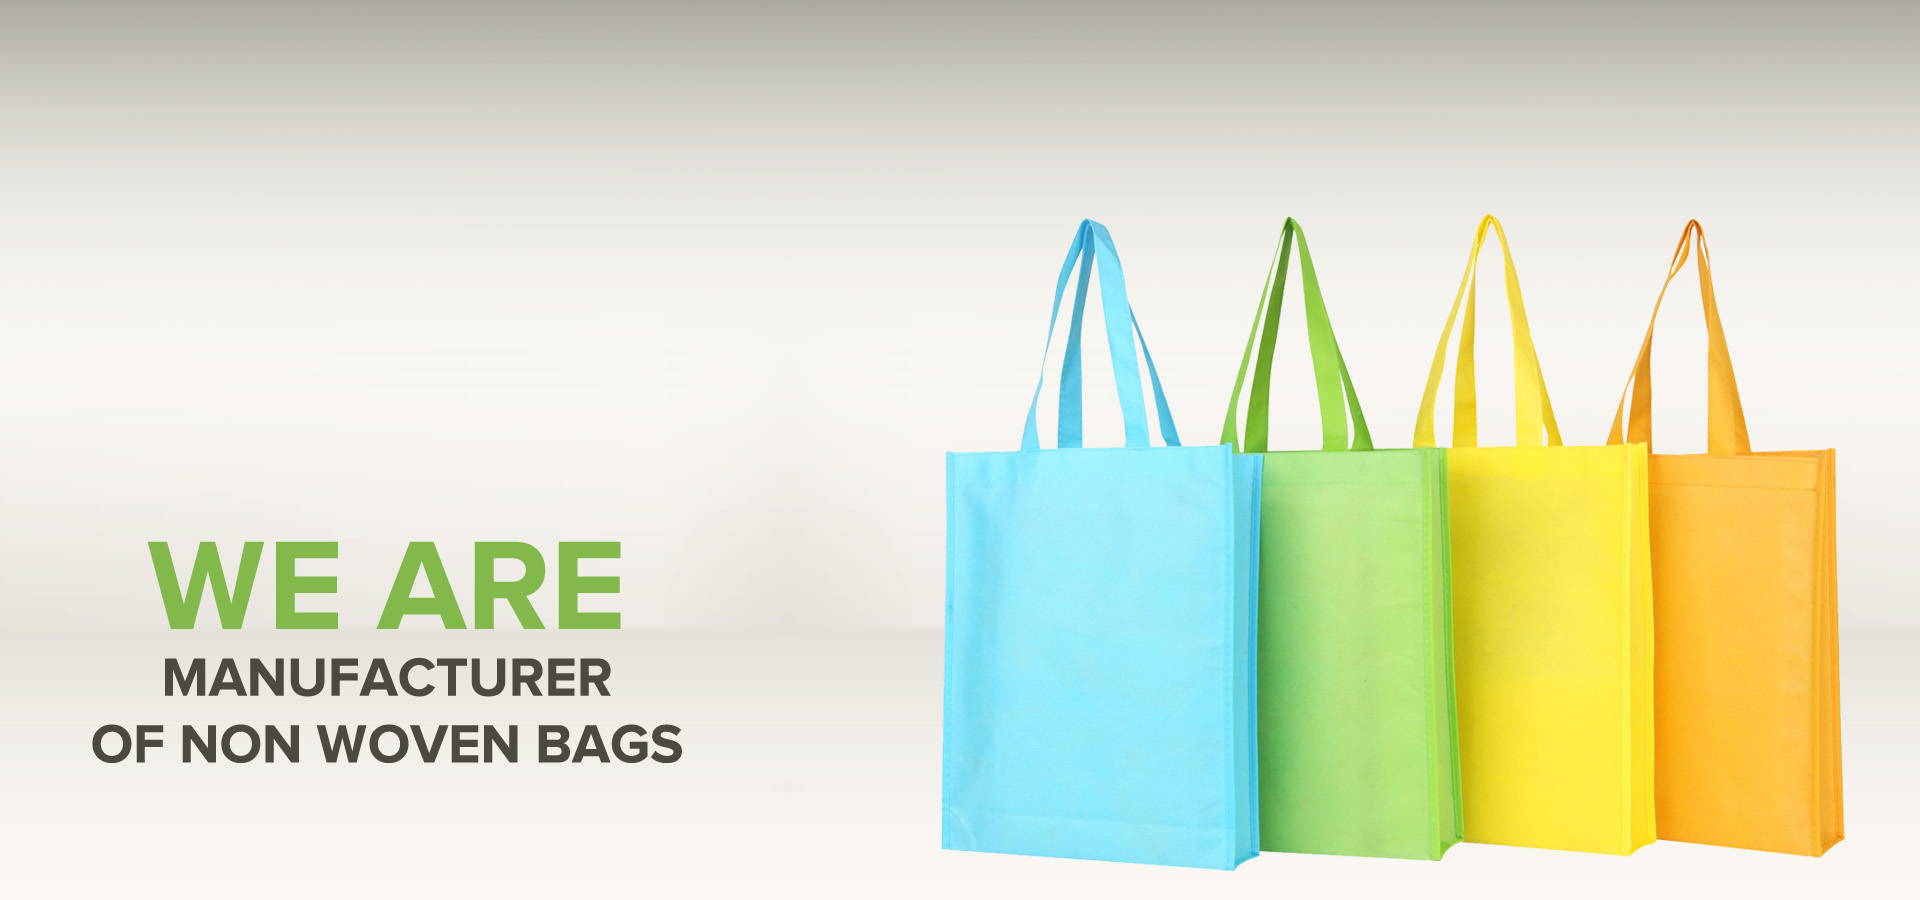 Katta Pai - Non Woven Bags Manufacturer & Suppliers in Trichy